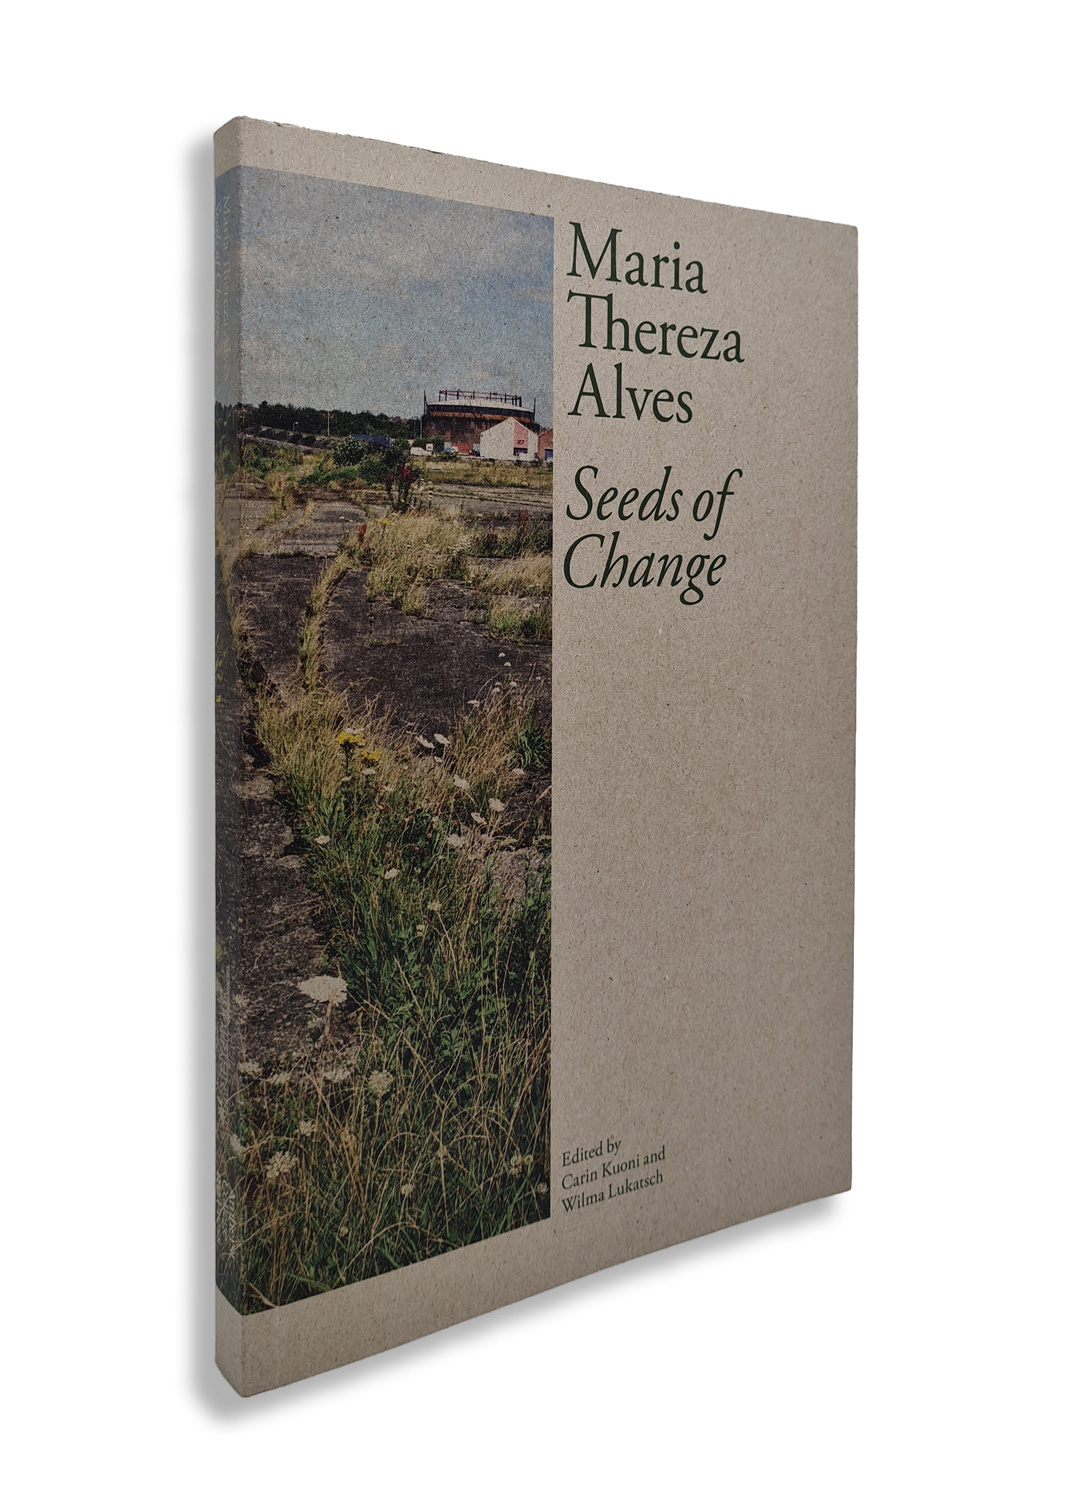 Maria Thereza Alves, Seeds of Change